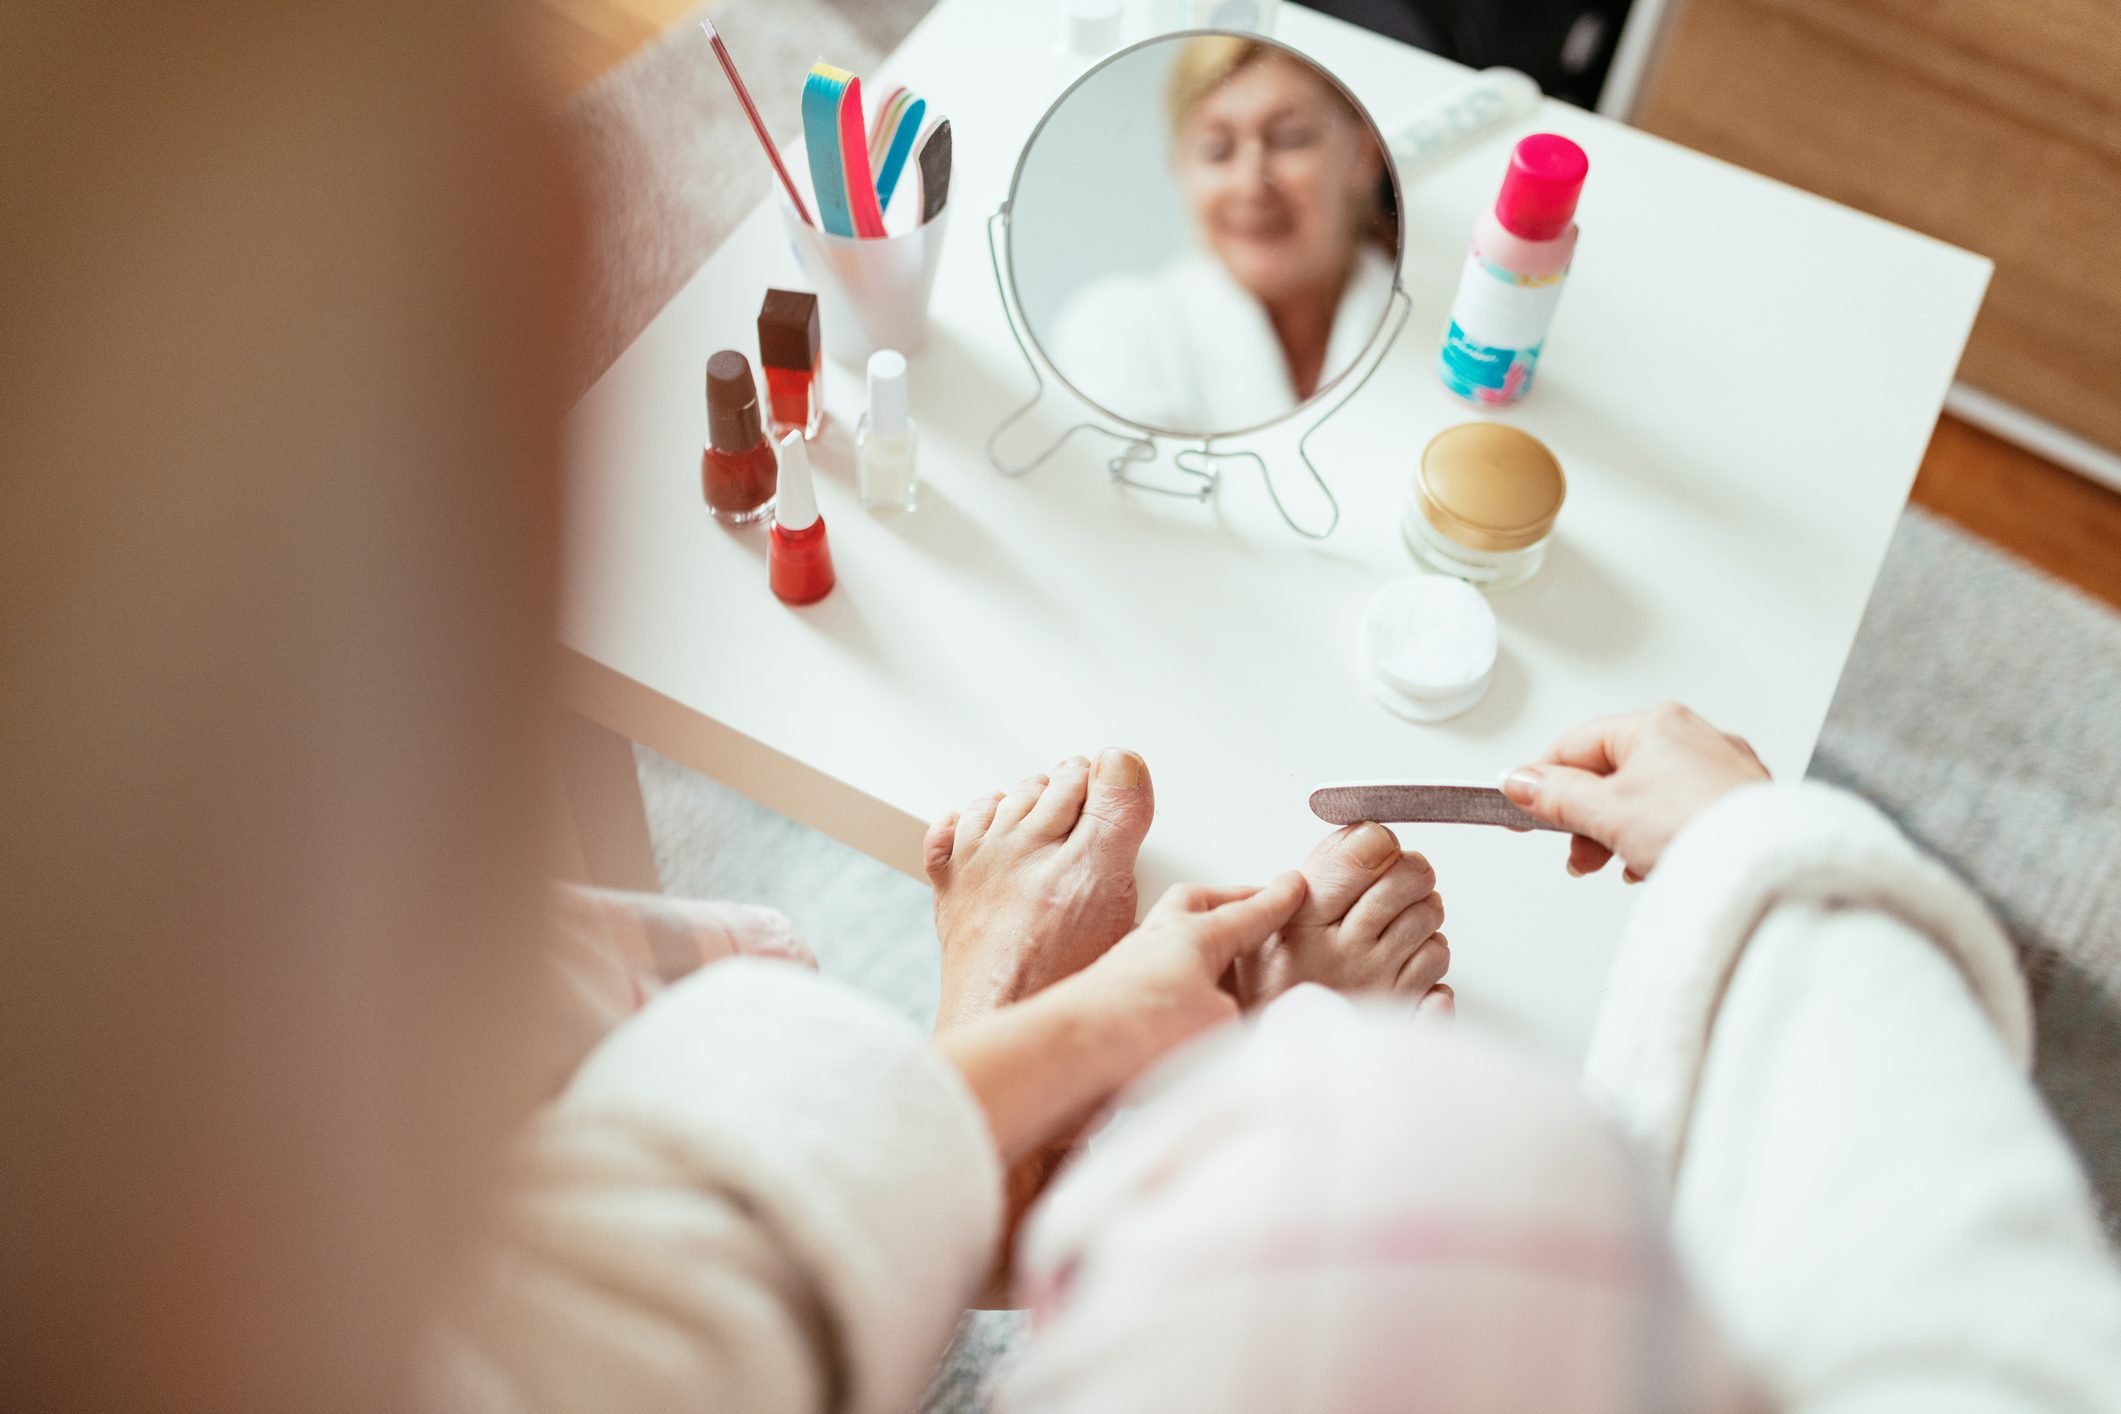 Pedicure Etiquette: The Do's & Don'ts Of Getting Pedicures